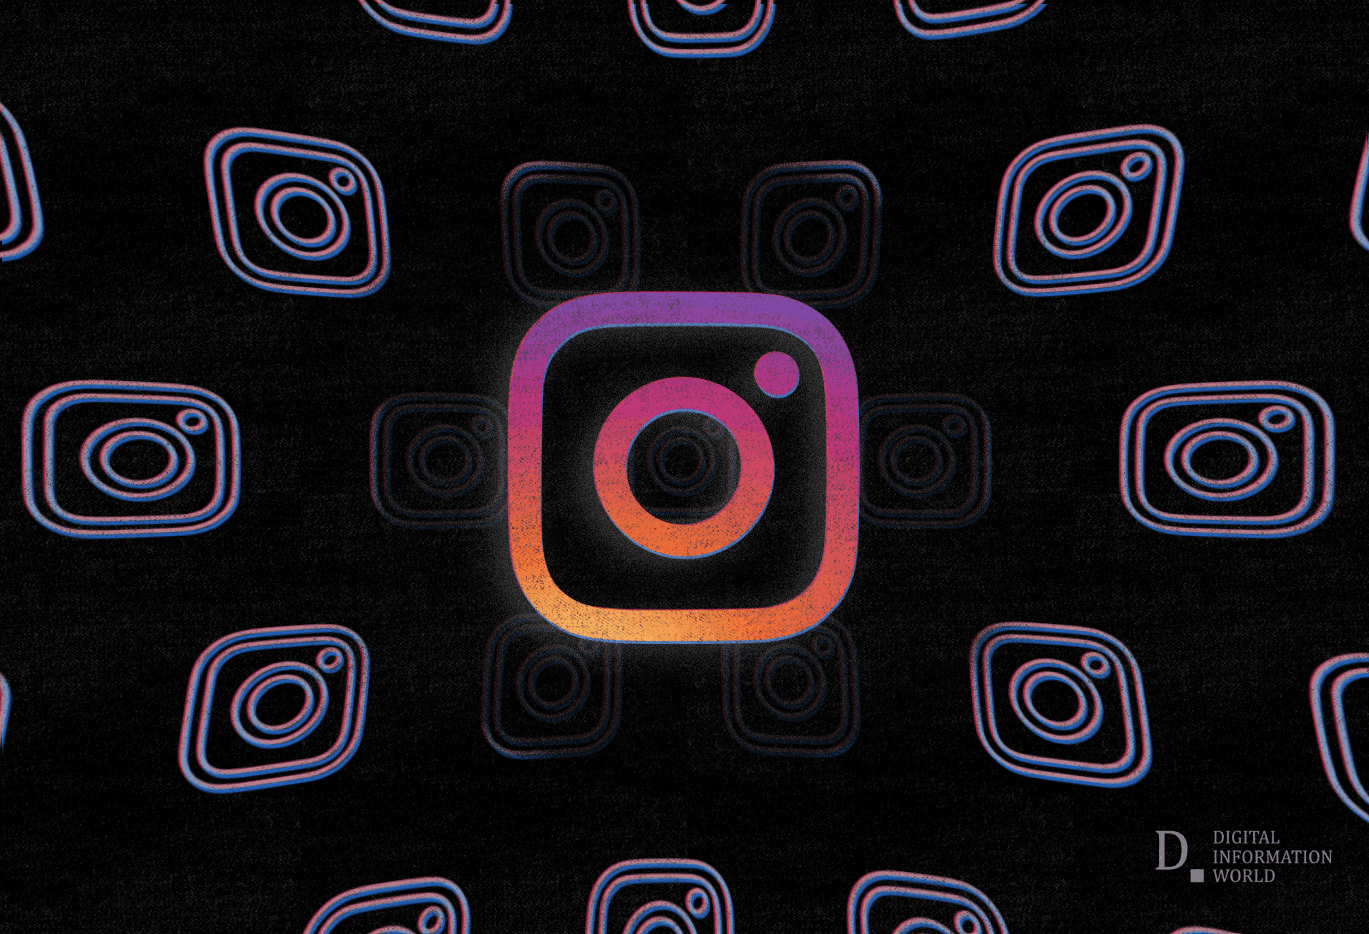 Instagram Is Finally Planning To Pay Publishers With Certain Conditions